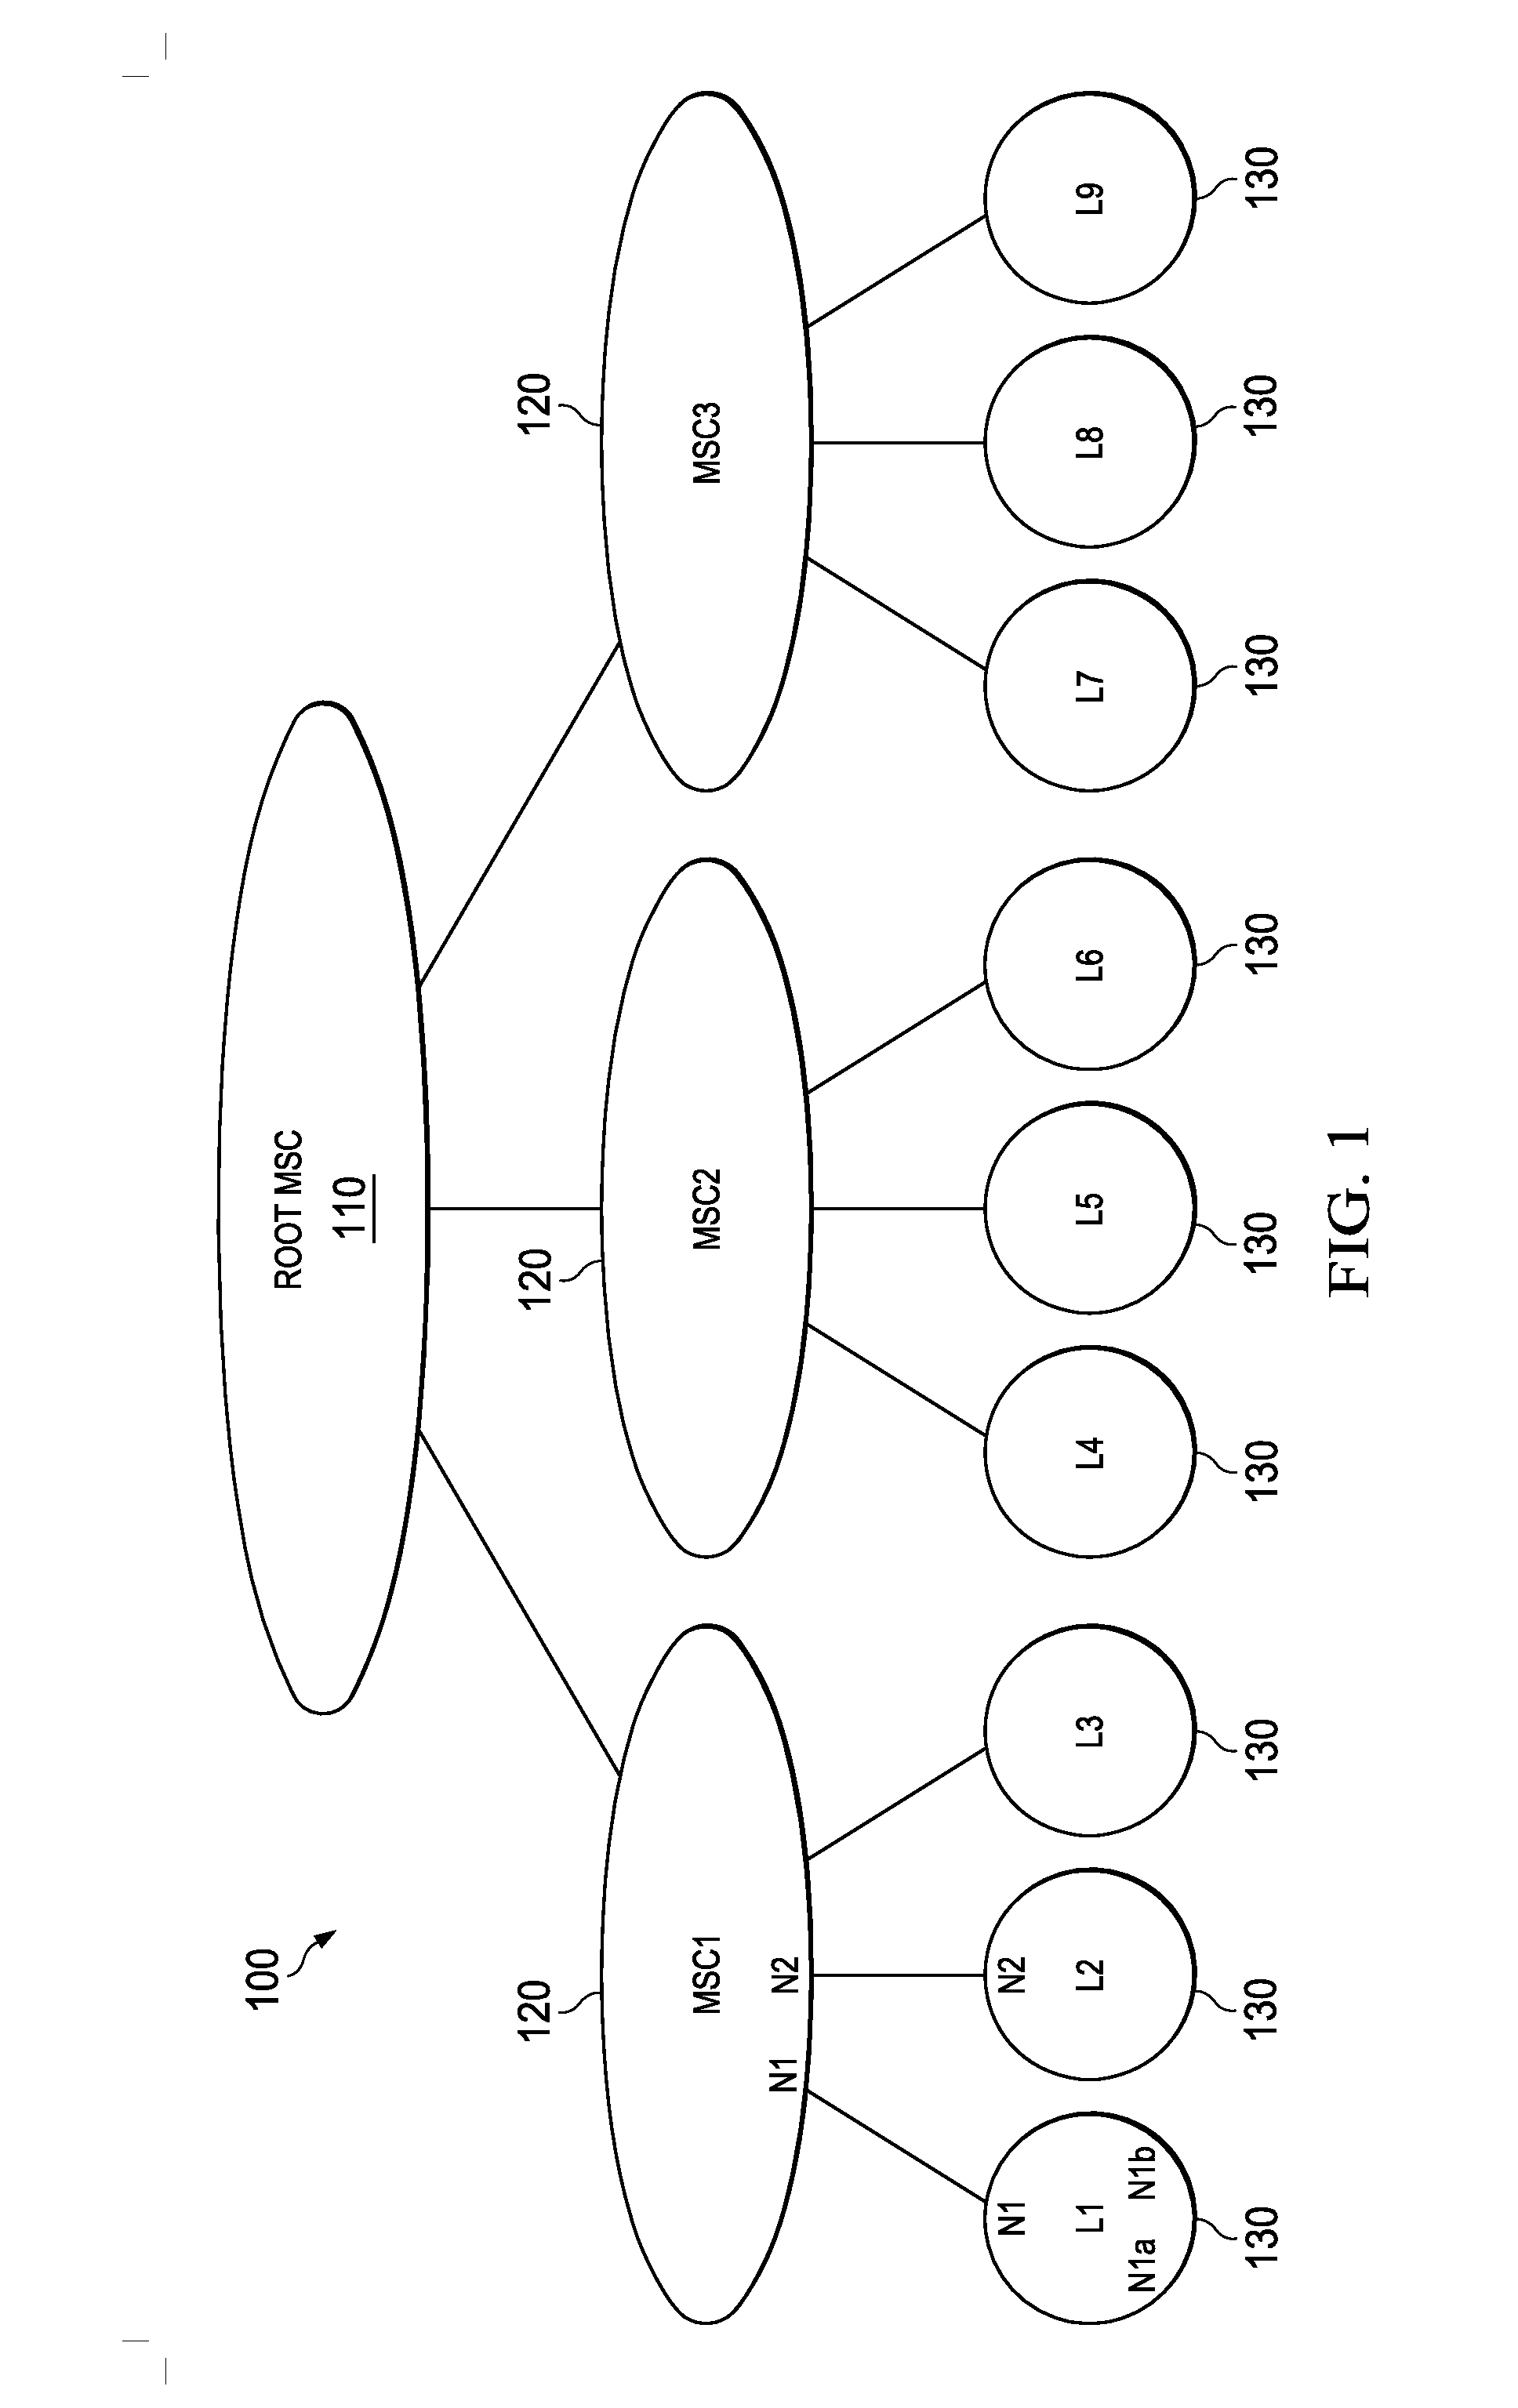 System and Method for Creating Highly Scalable High Availability Cluster in a Massively Parallel Processing Cluster of Machines in a Network